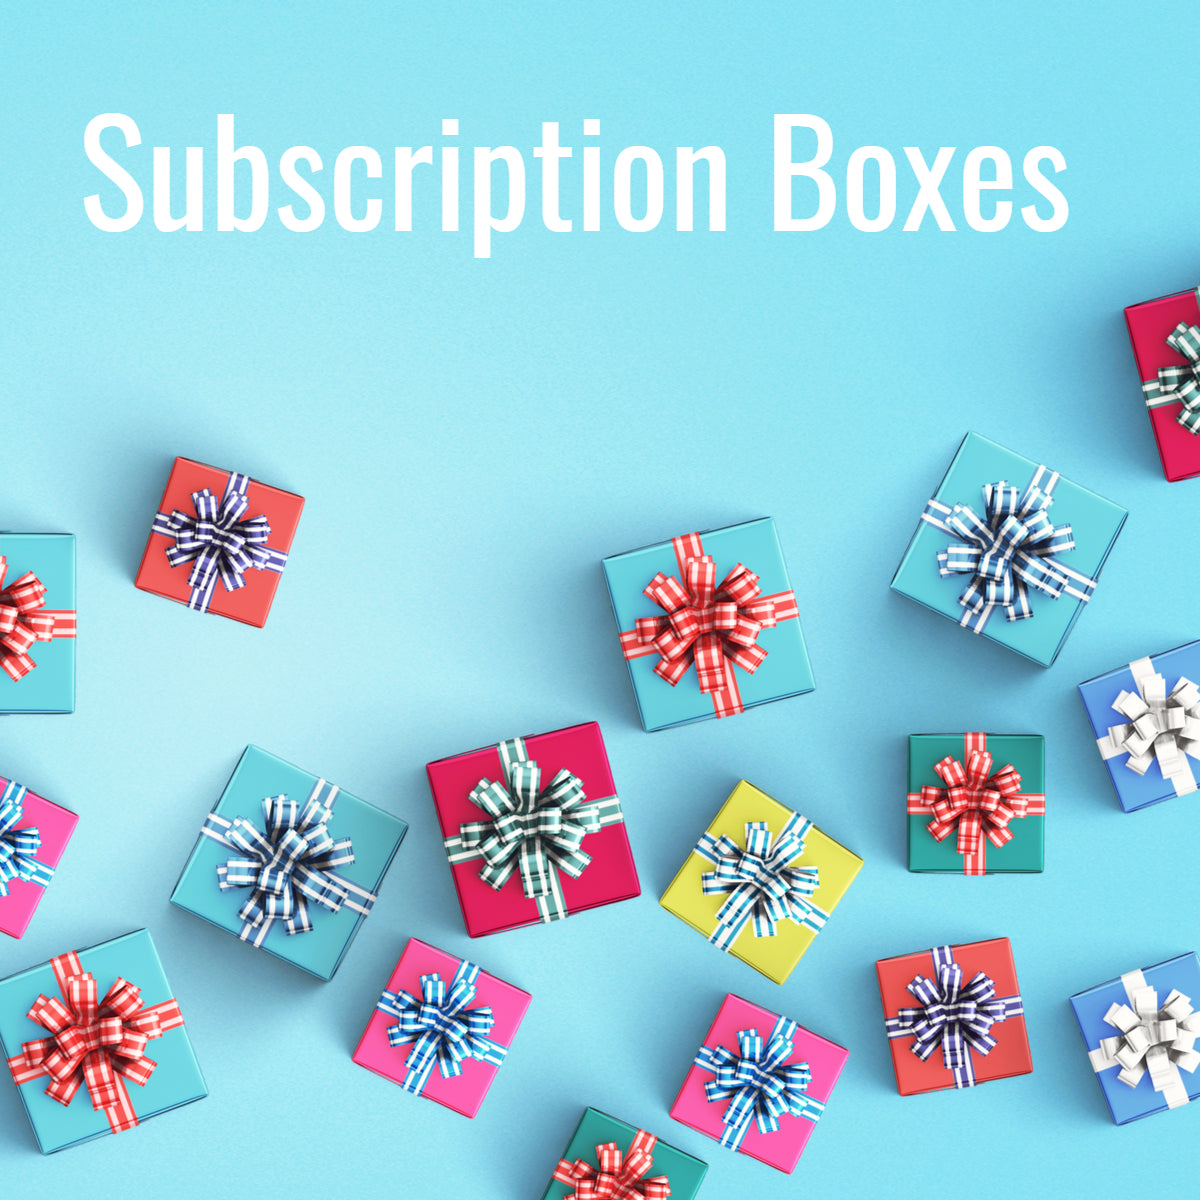 Subscription Boxes, Gifts and Gift Cards